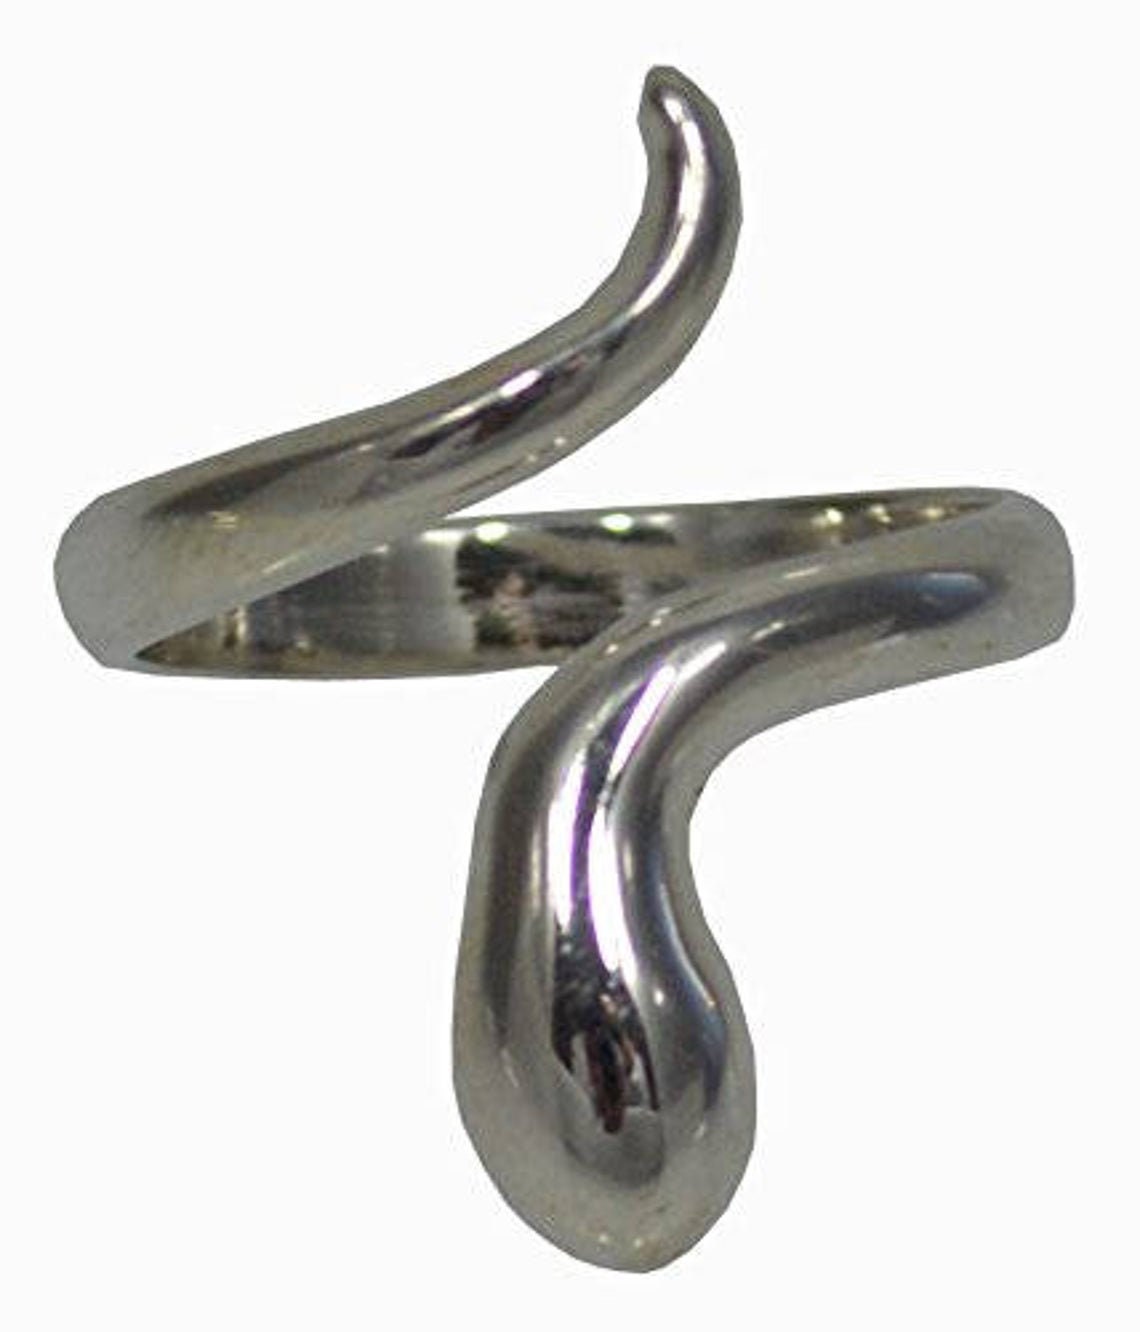 Minoan Snake - Greek Symbol of Rebirth, Transformation, Immortality and Healing - Ring - Size Between Us 6 to 8 1/2  - 925 Sterling Silver